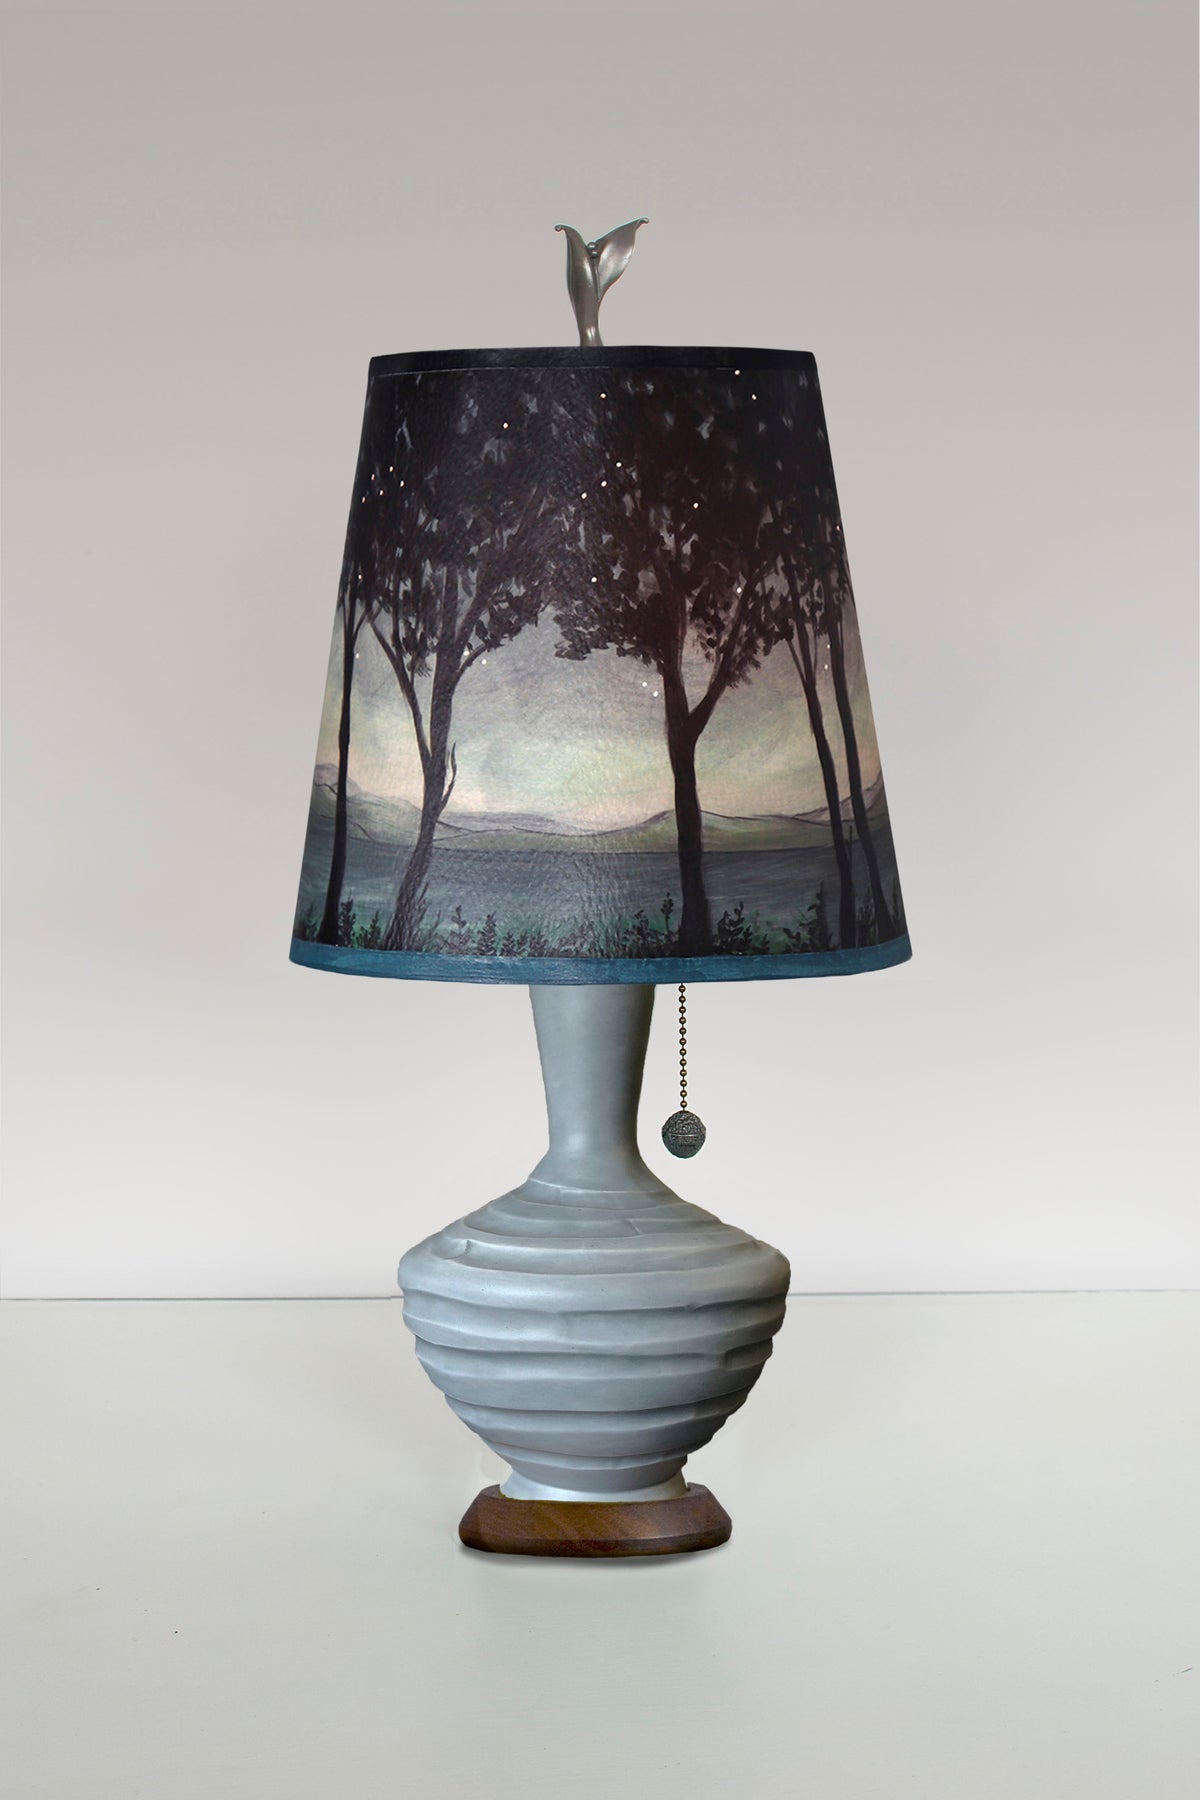 Janna Ugone &amp; Co Table Lamps Ceramic Table Lamp with Small Drum Shade in Twilight